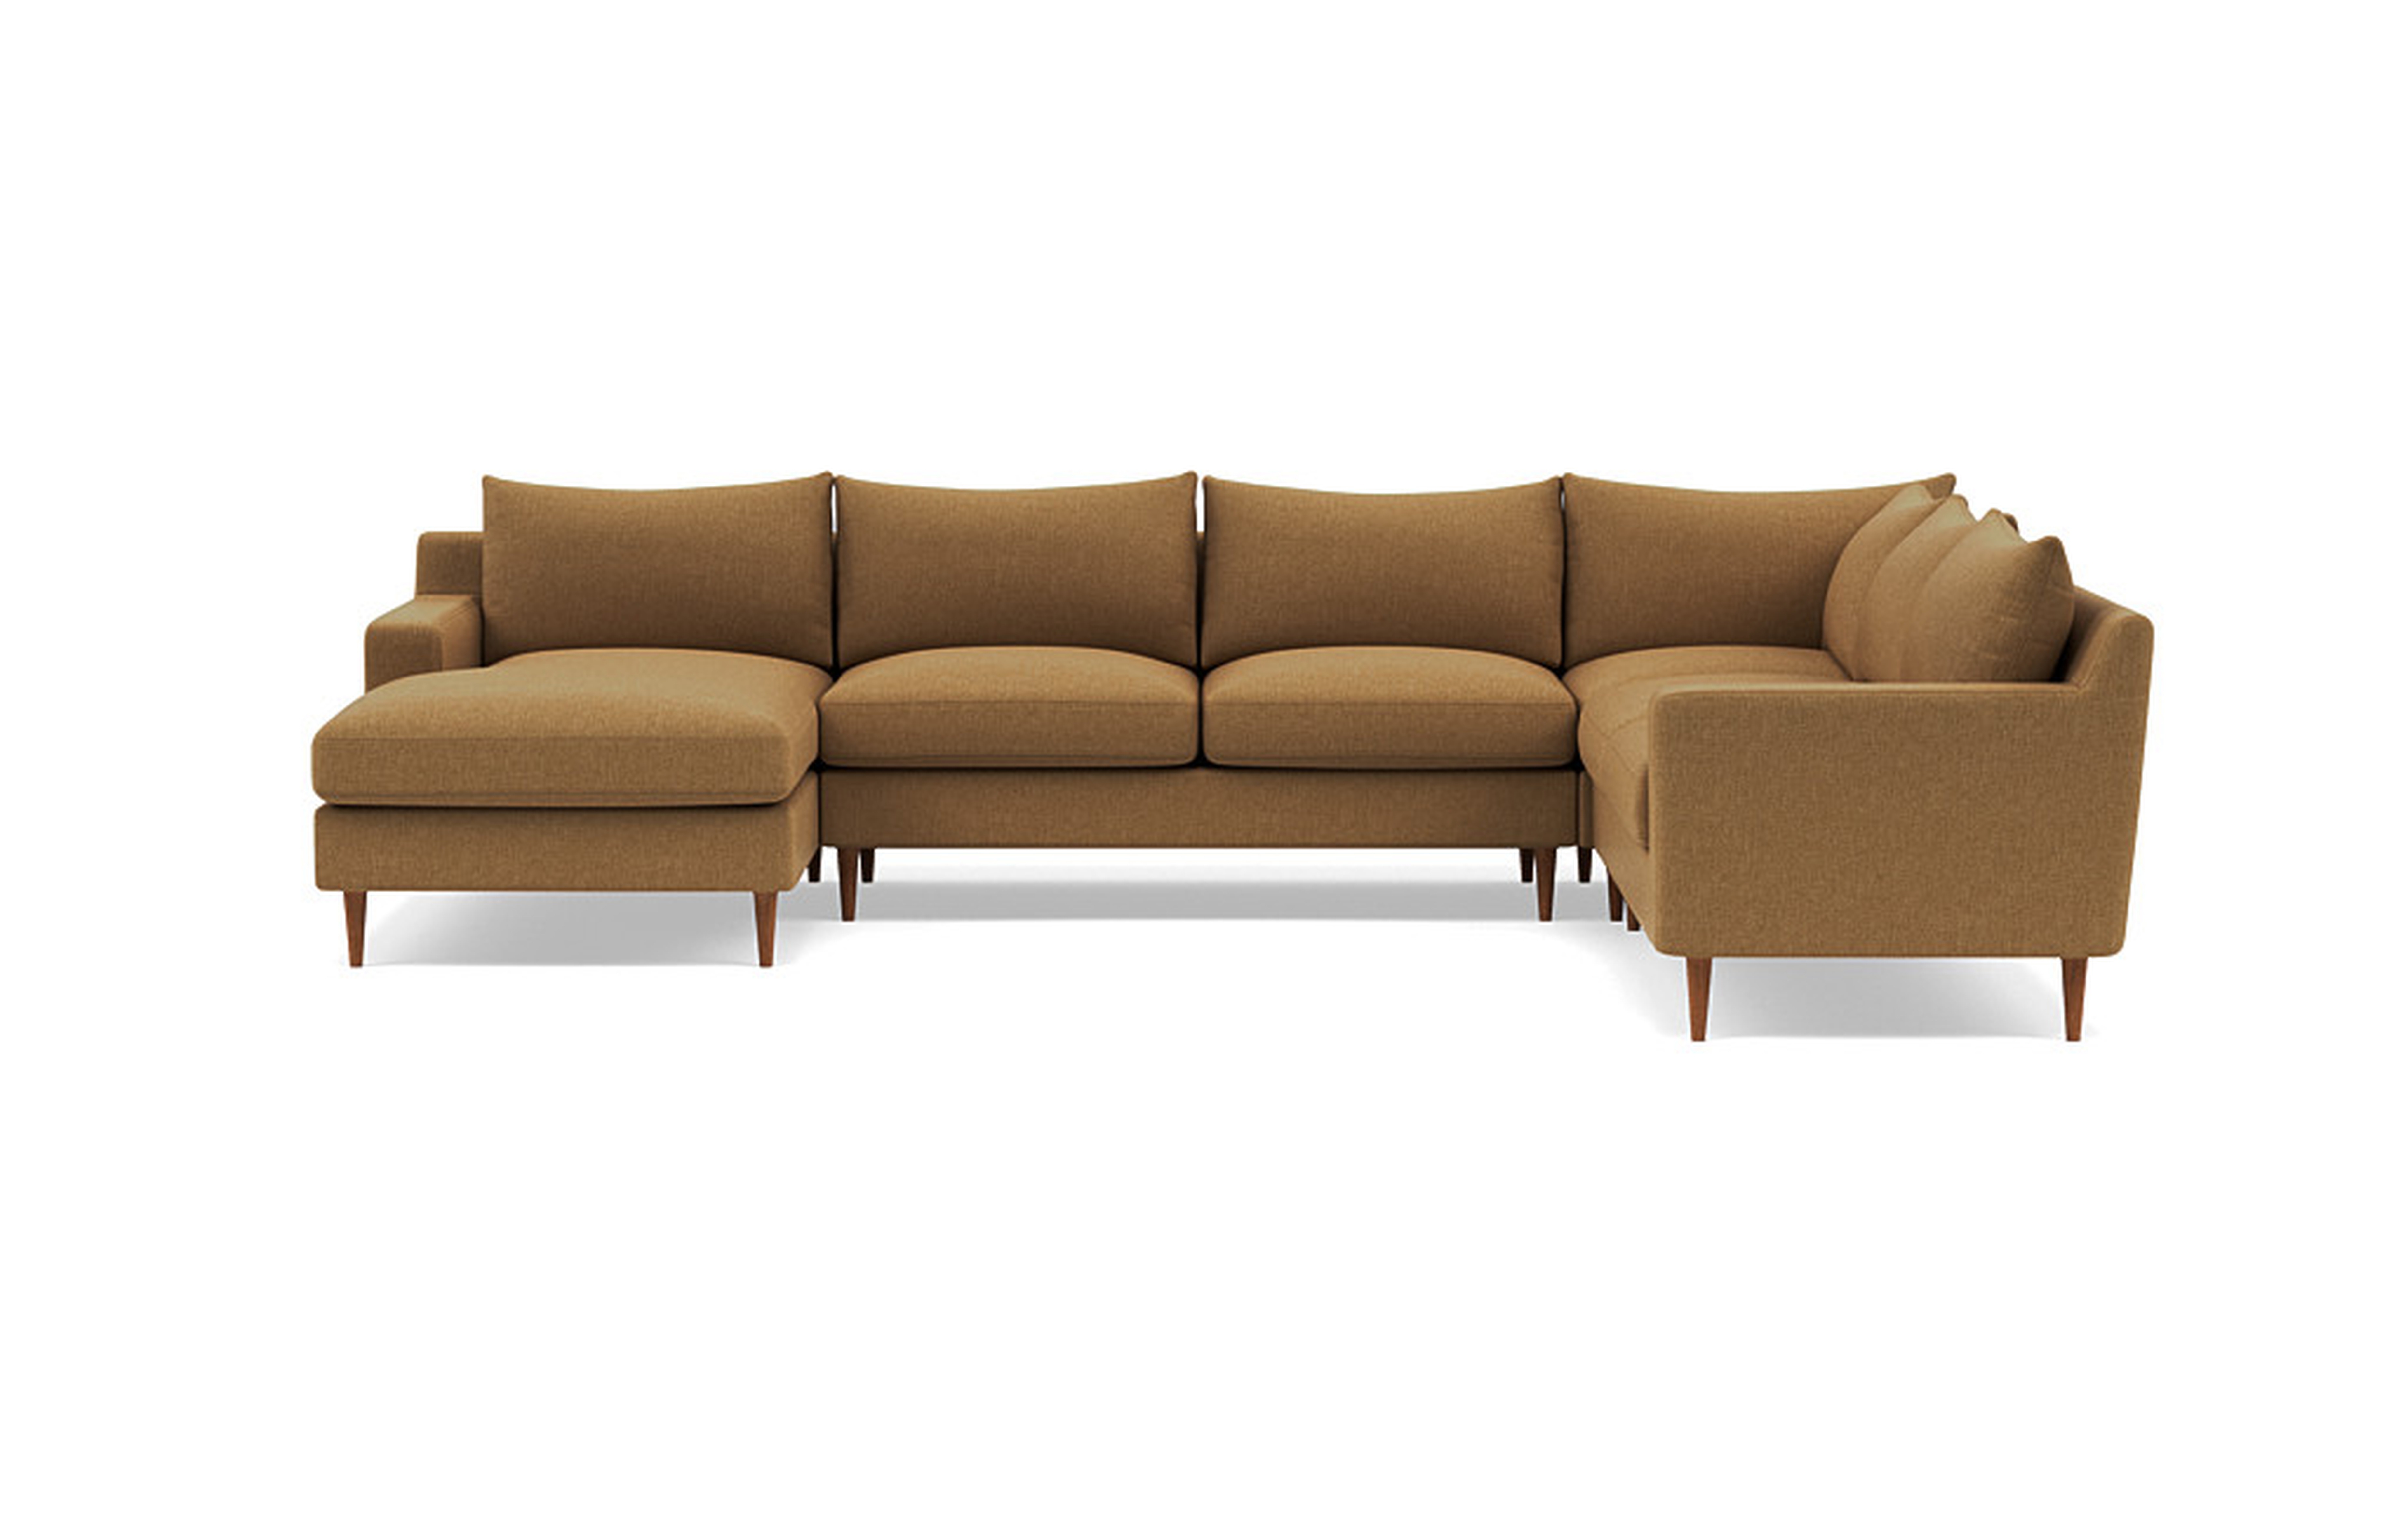 SLOAN 4-Piece Corner Sectional Sofa with Left Chaise - Honey Weave, Oil Walnut Tapered Round Wood Legs, 122" x 93", Down Alternative Fill - Interior Define